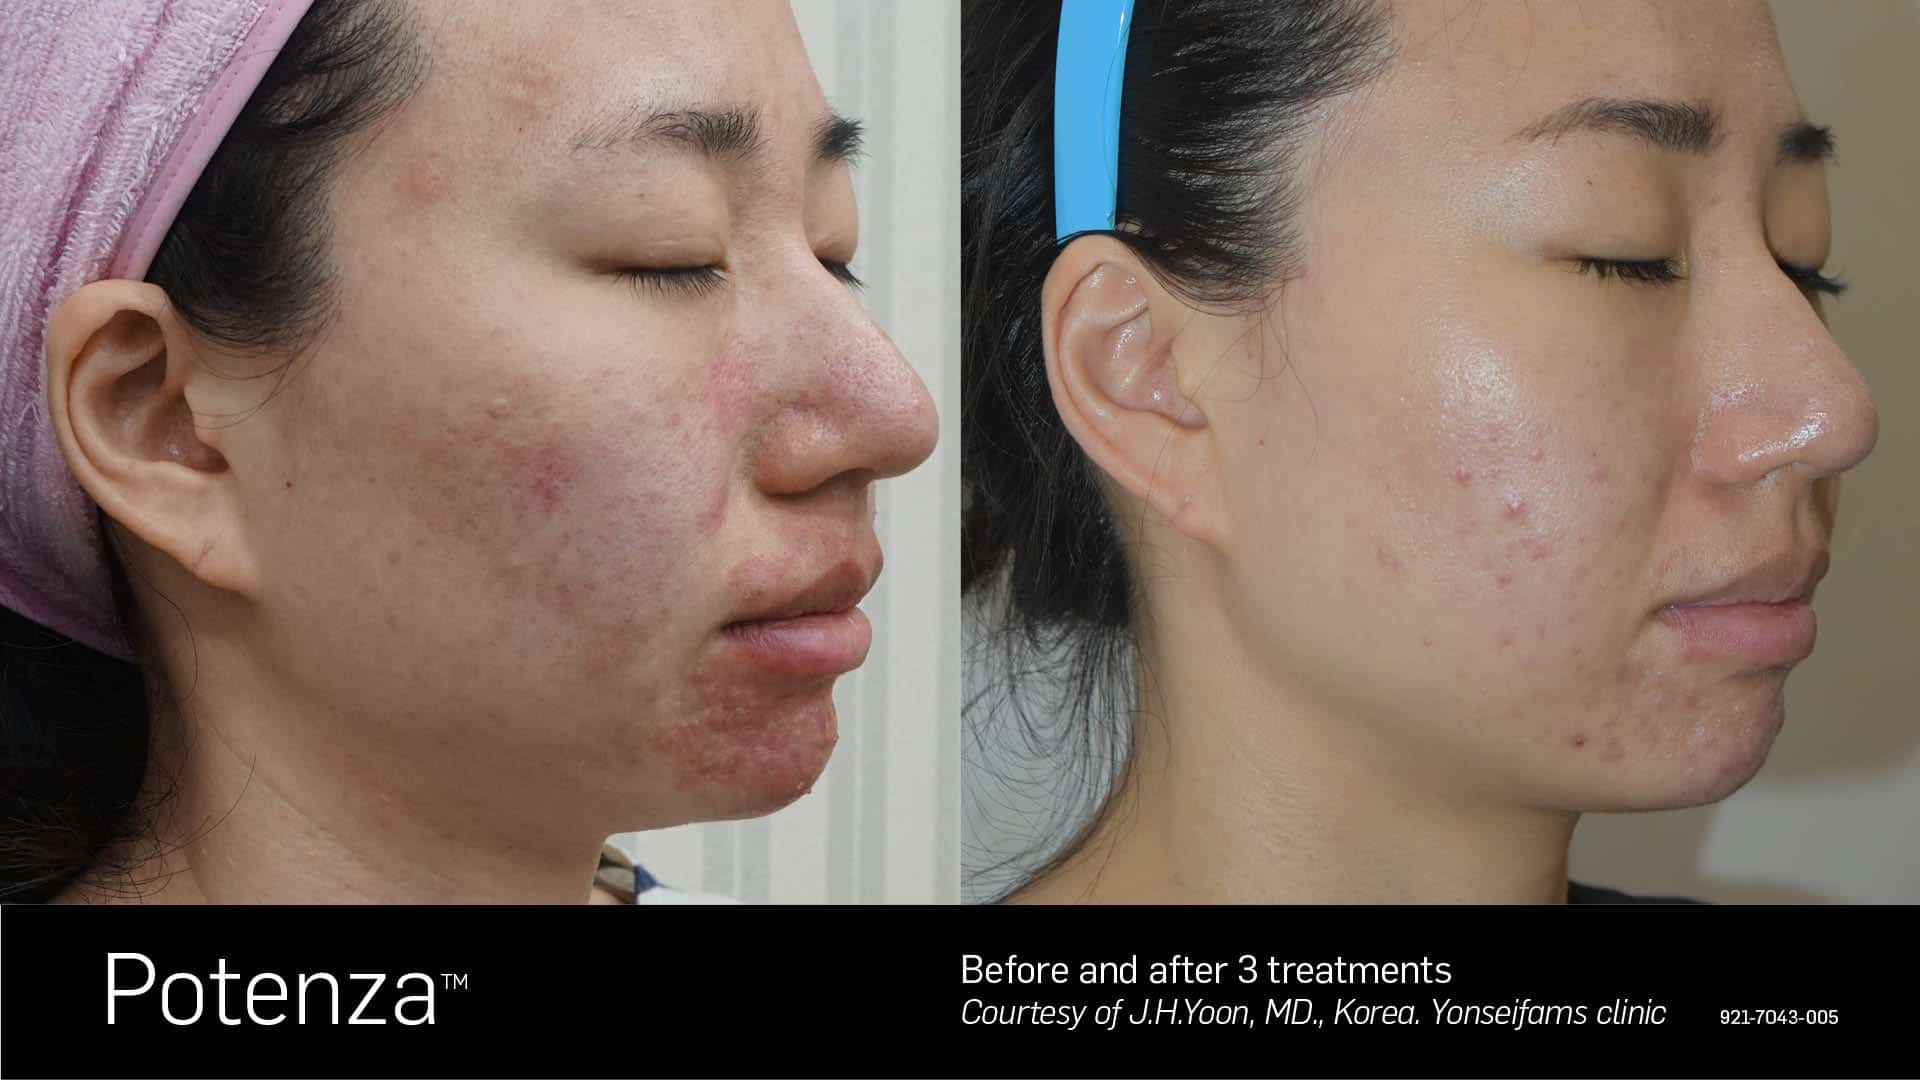 Potenza Acne Treatment Toronto Before and After (2)